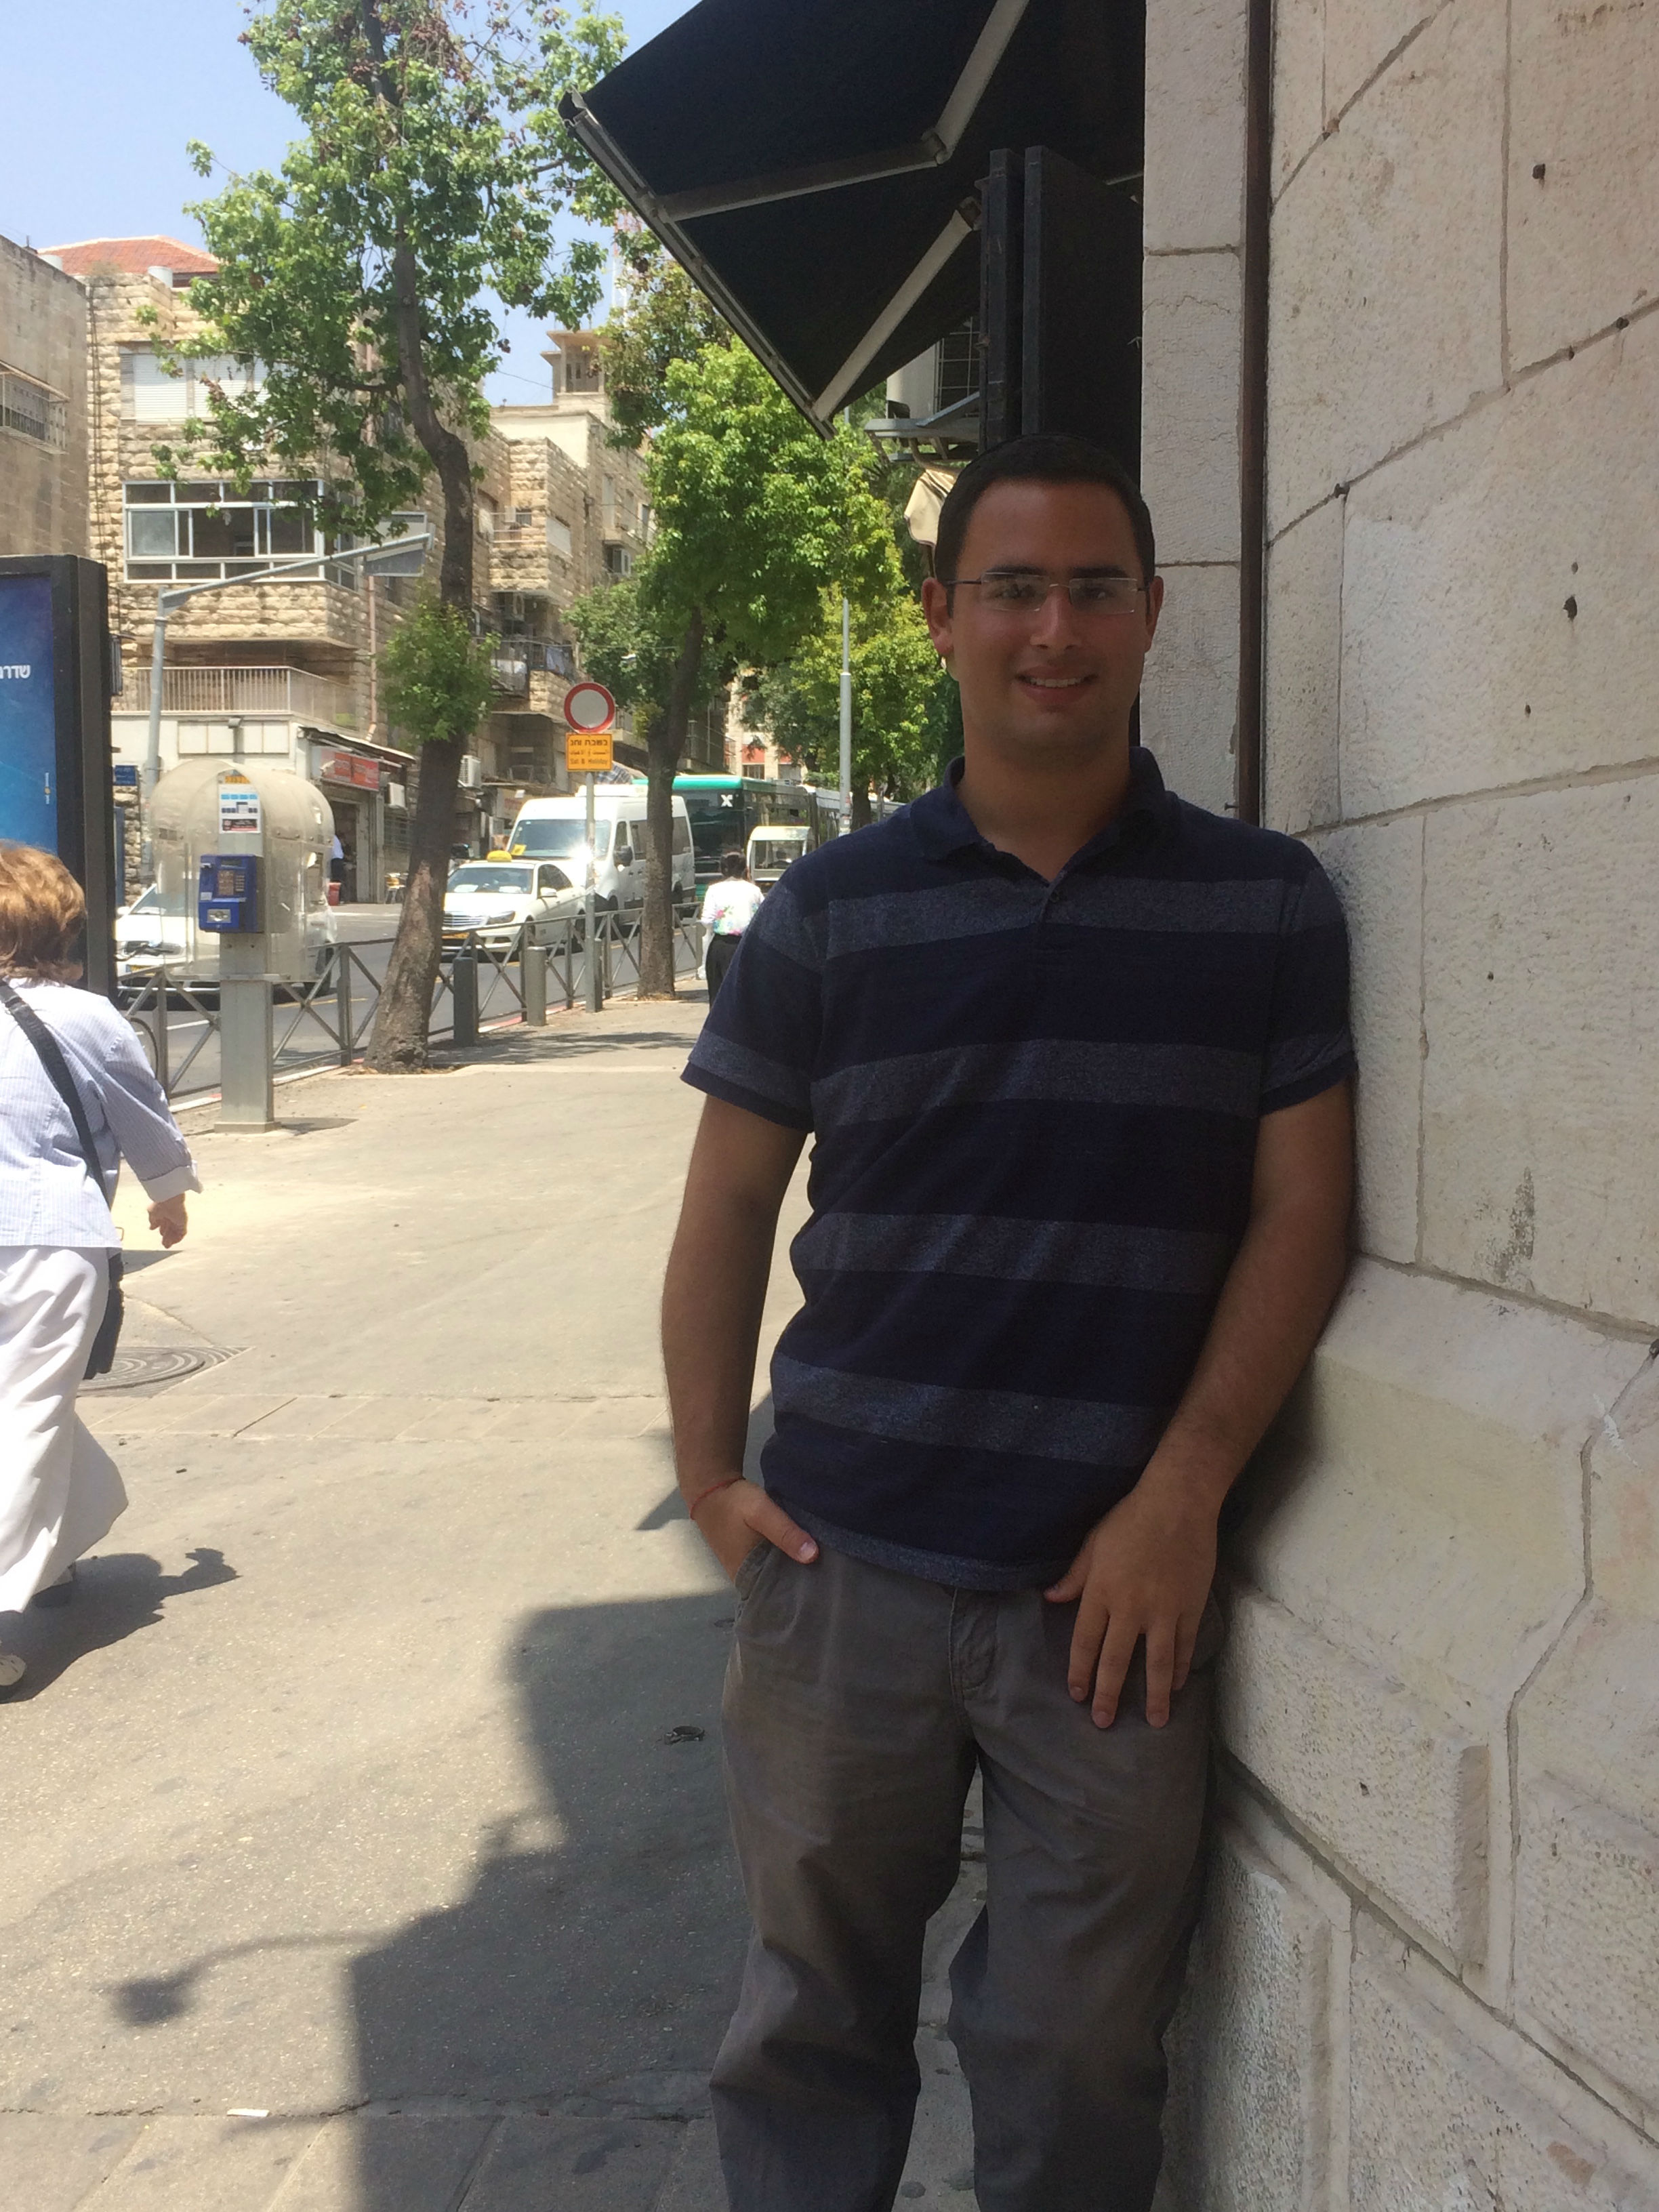 Raphael Gal standing at the entrance of software development company Tobeweb, in Jerusalem, where he interned this summer